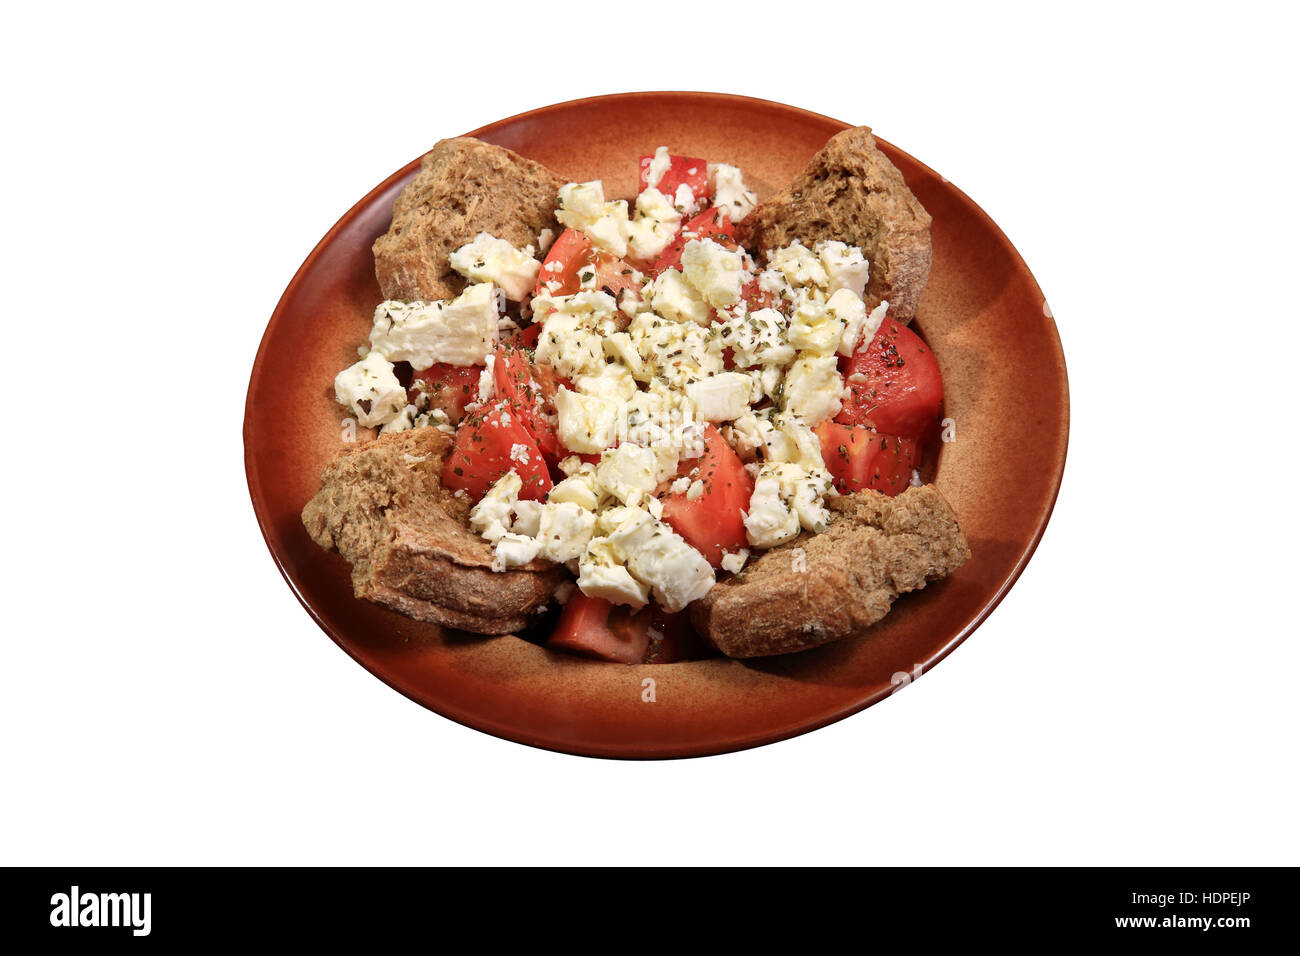 salad with feta cheese and tomato served on a plate Stock Photo